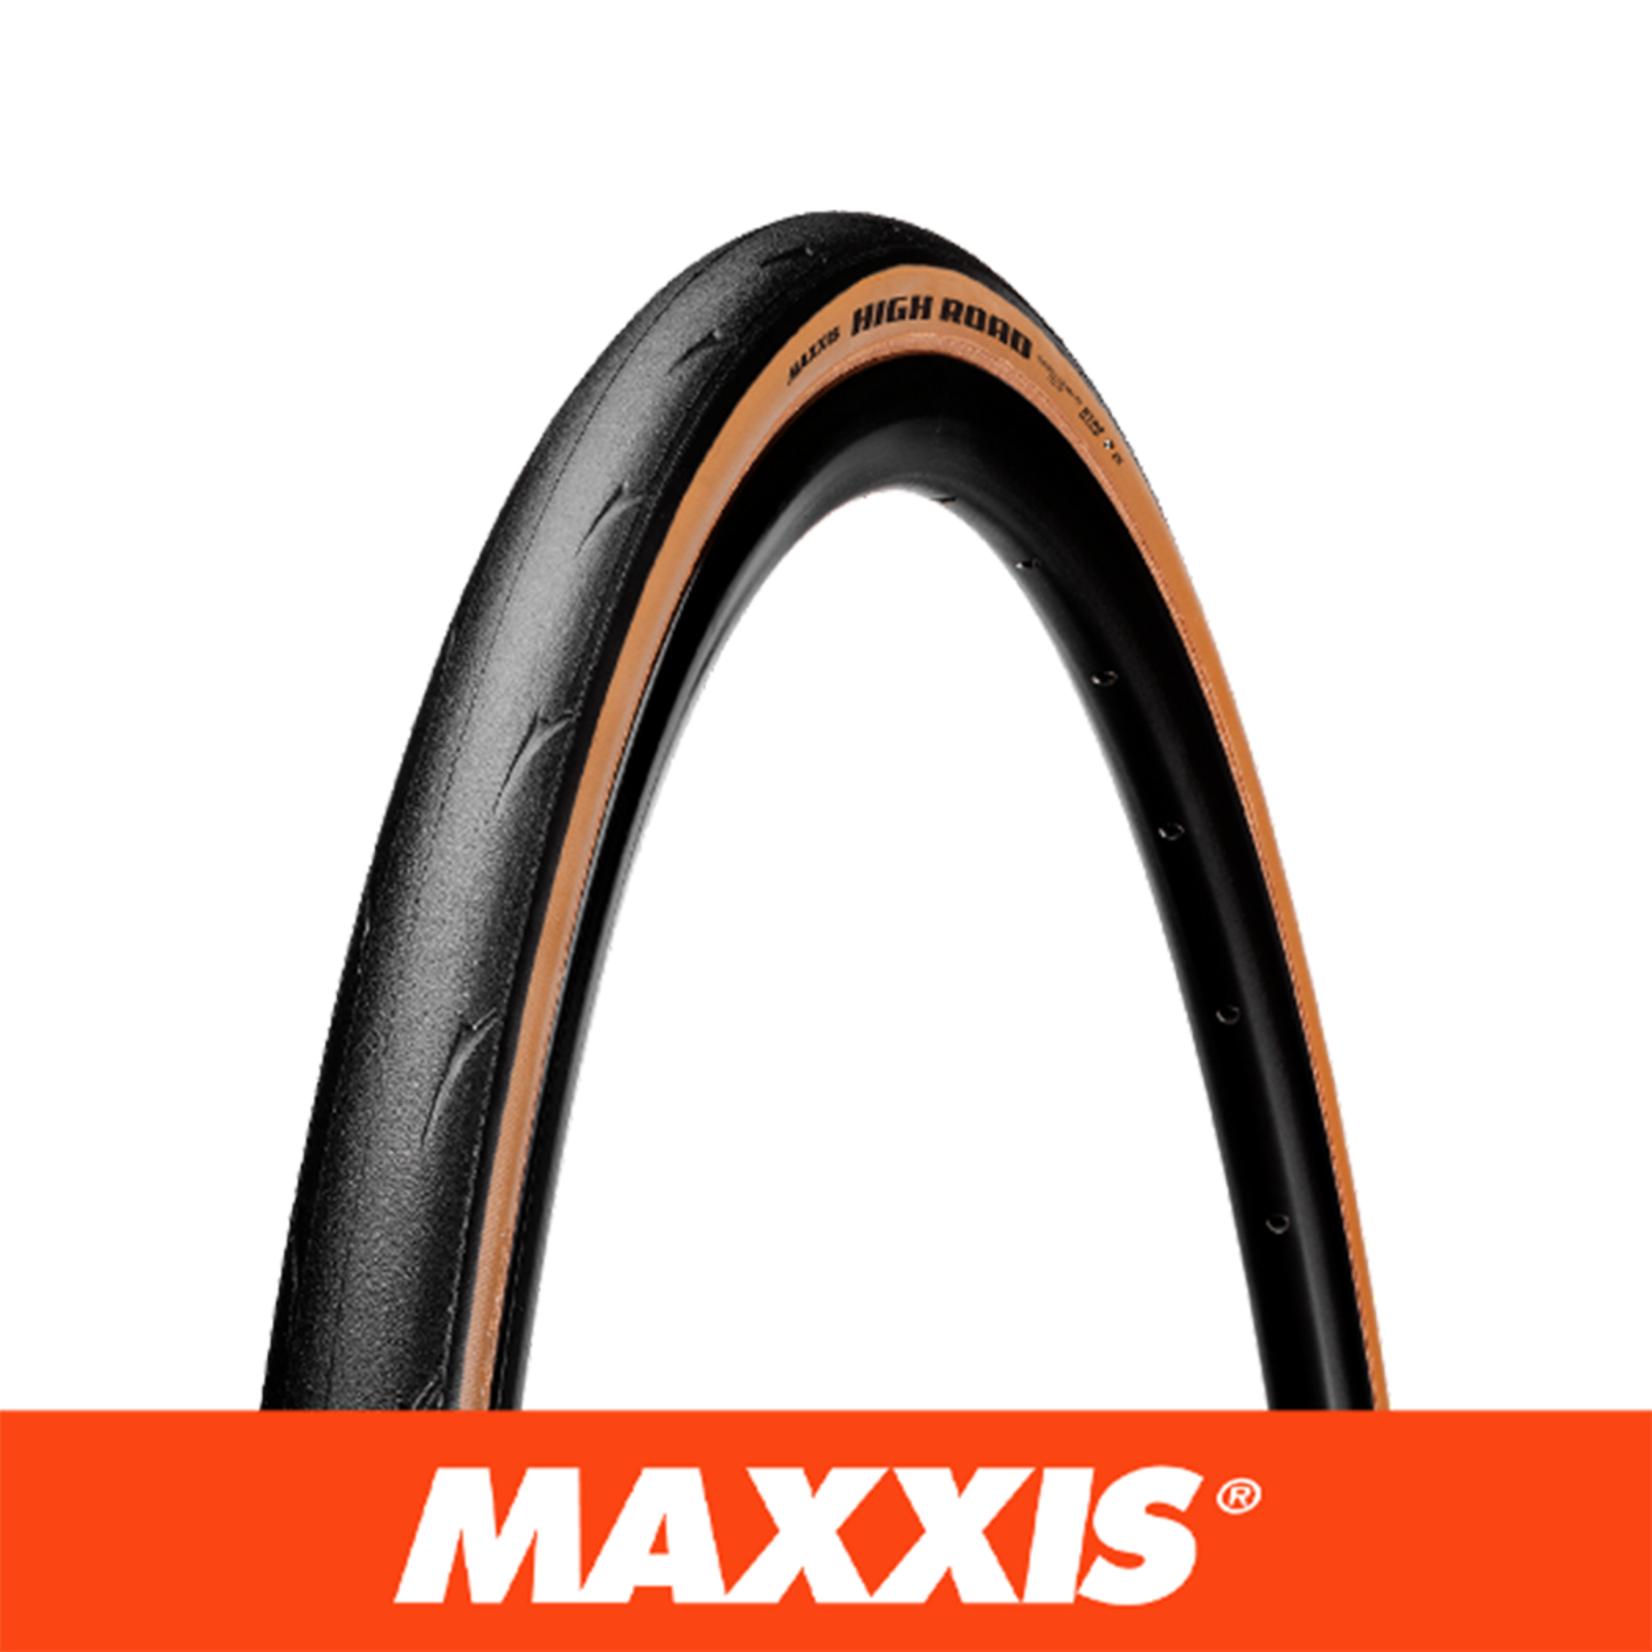 MAXXIS MAXXIS HIGH ROAD 700 X 25 HYPR/ZK/ONE70